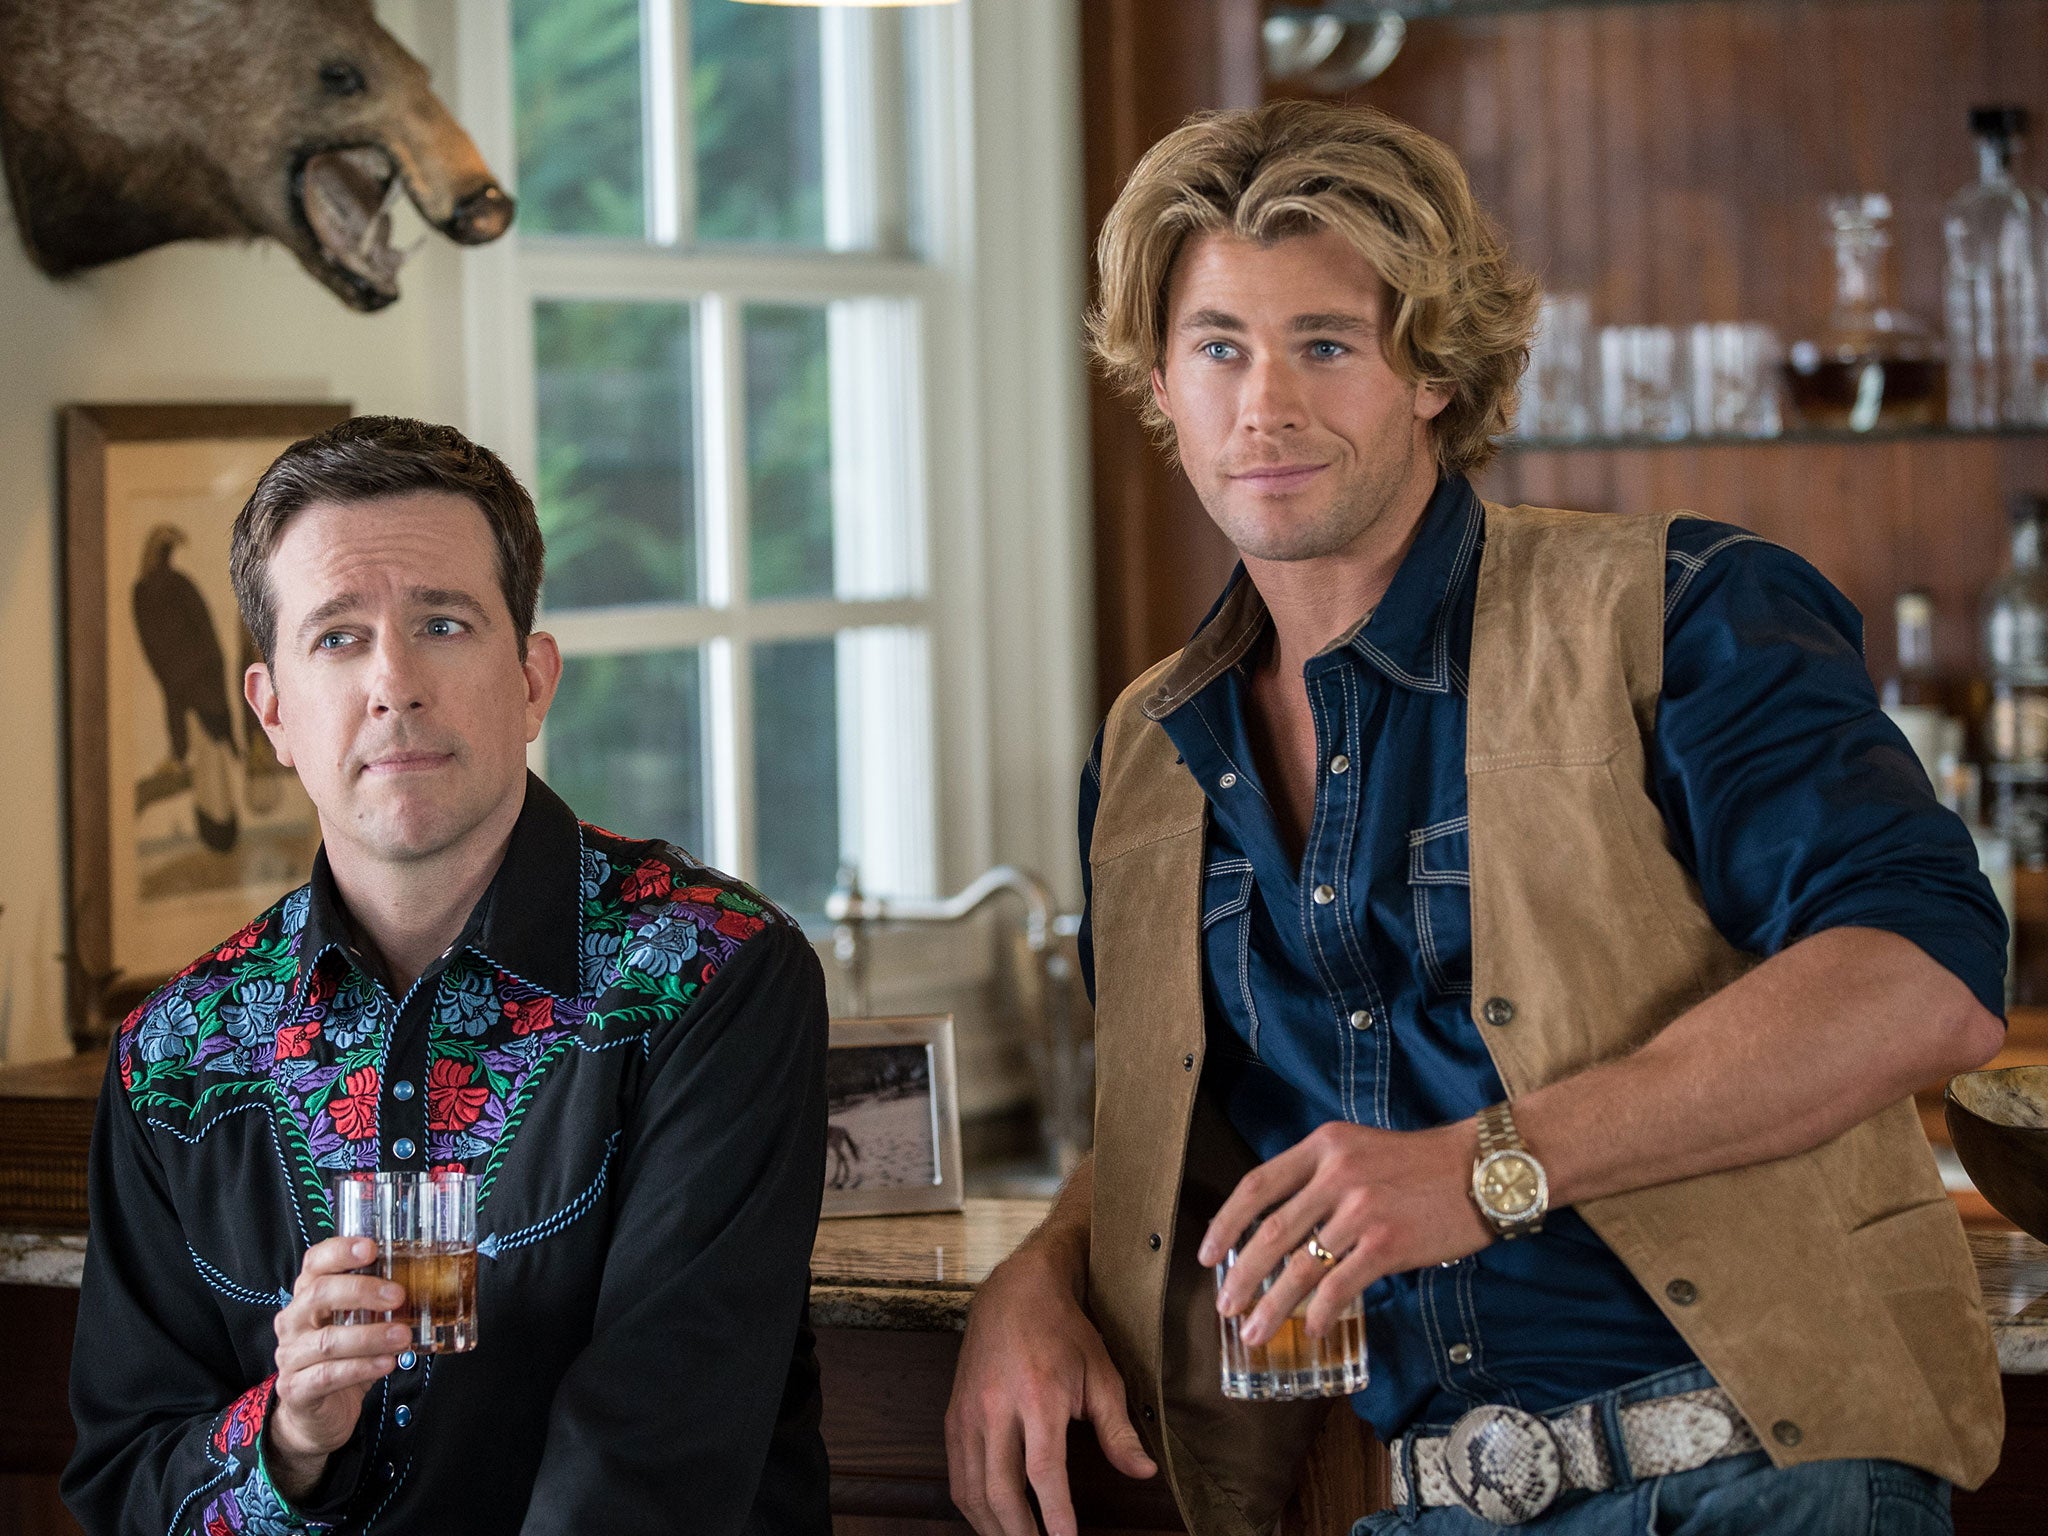 On holiday: Ed Helms and Chris Hemsworth in ‘Vacation’